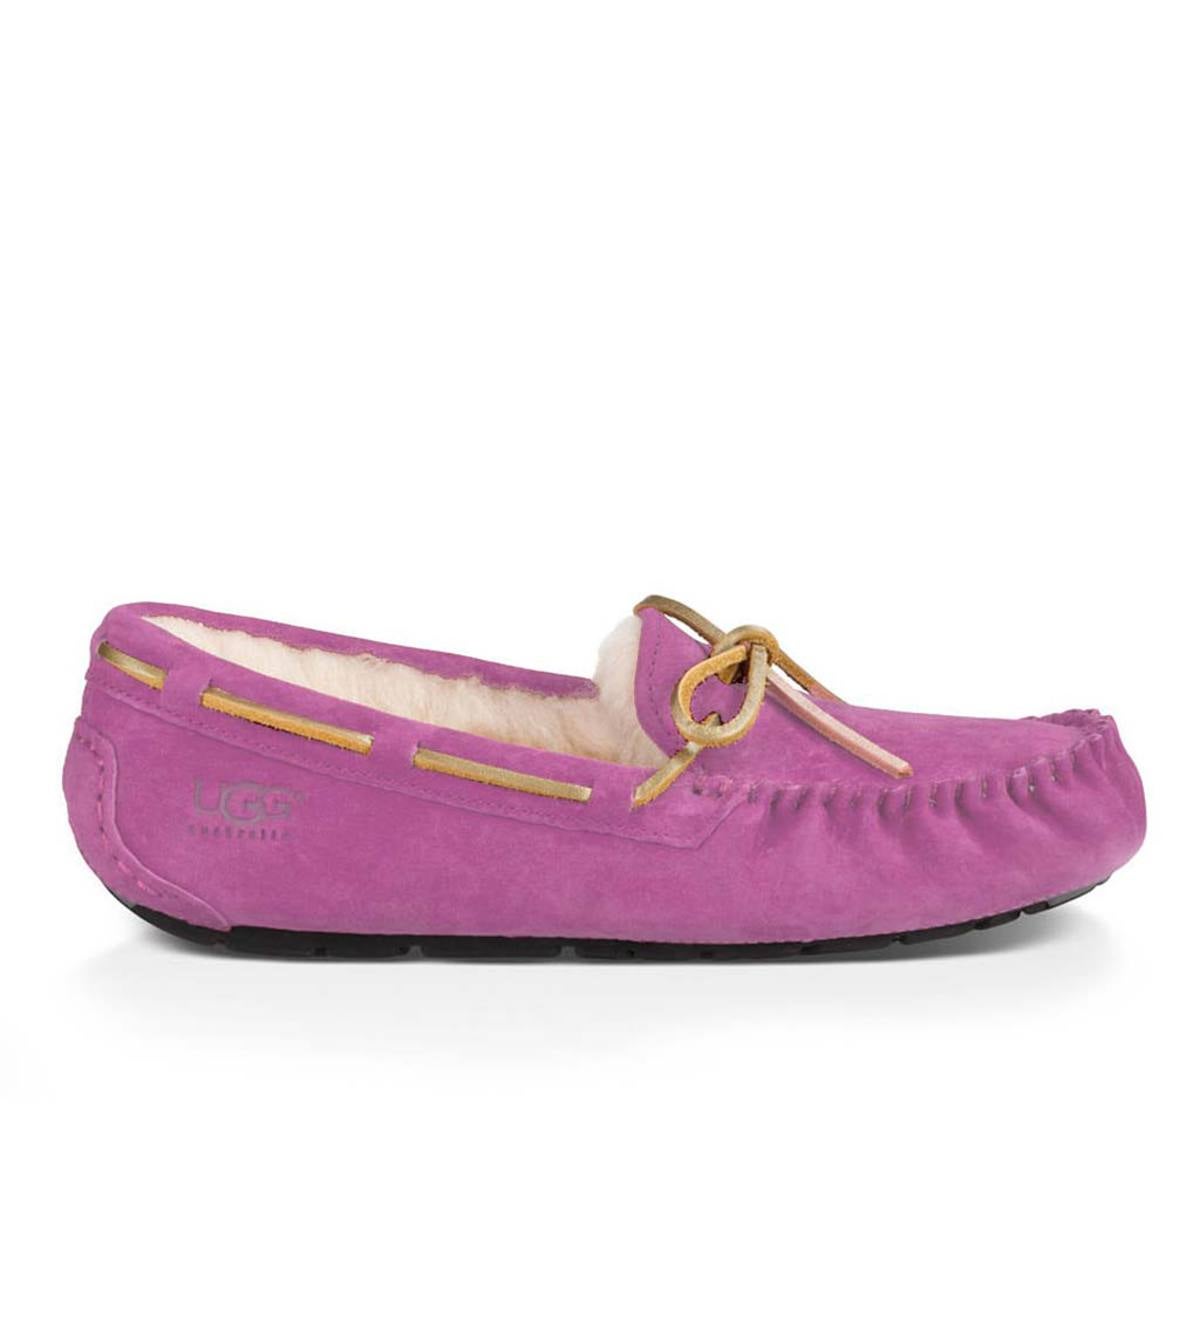 UGG Ansley Moccasin Slippers - Bodacious - Size 5